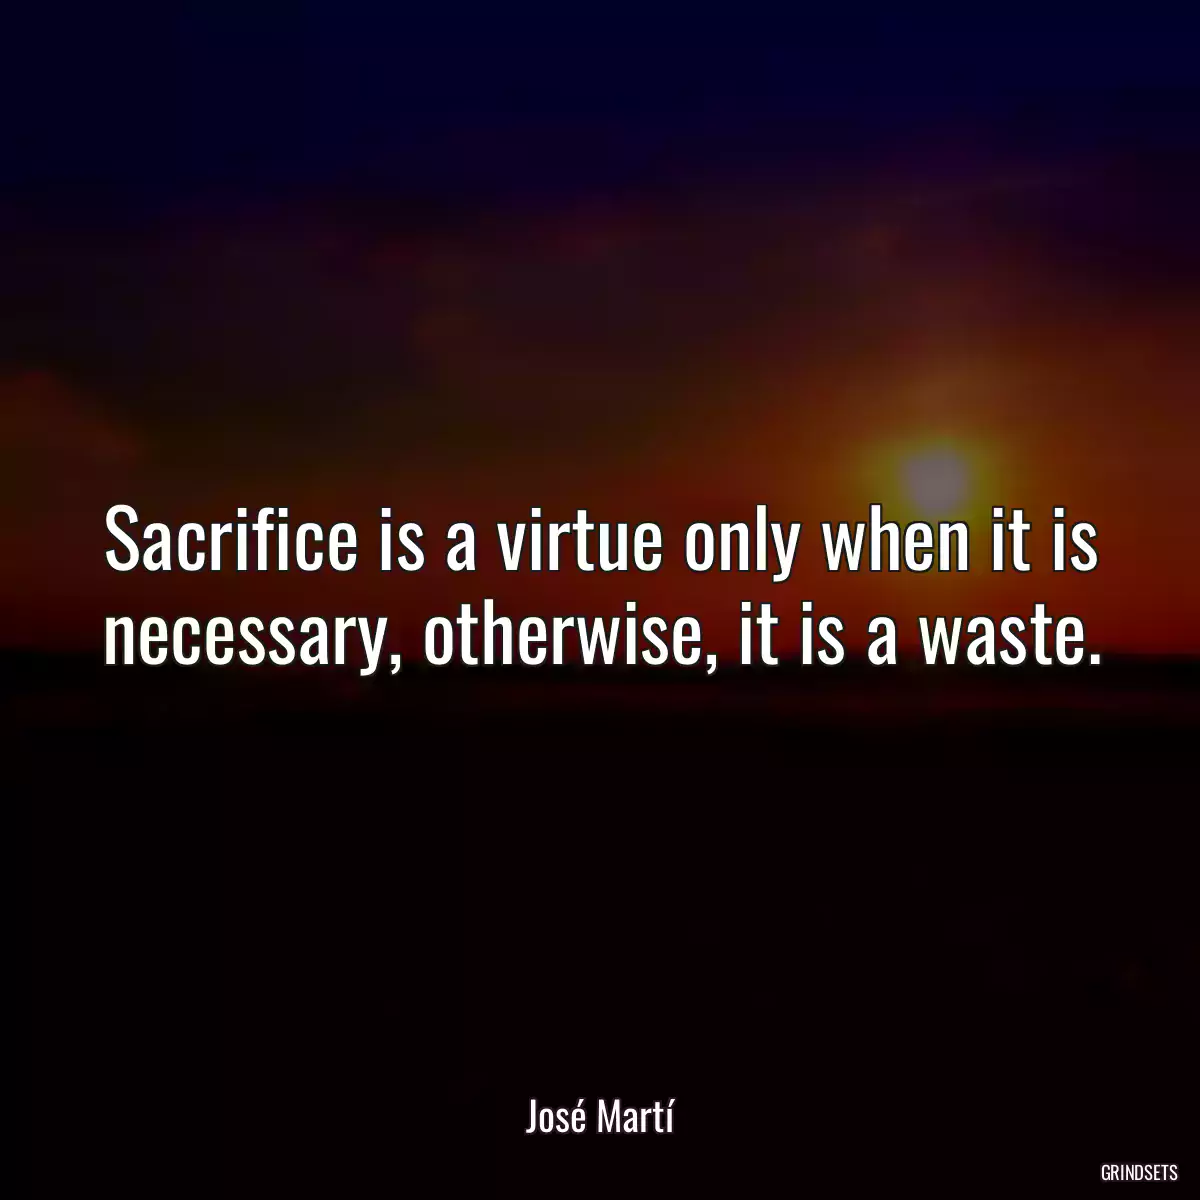 Sacrifice is a virtue only when it is necessary, otherwise, it is a waste.